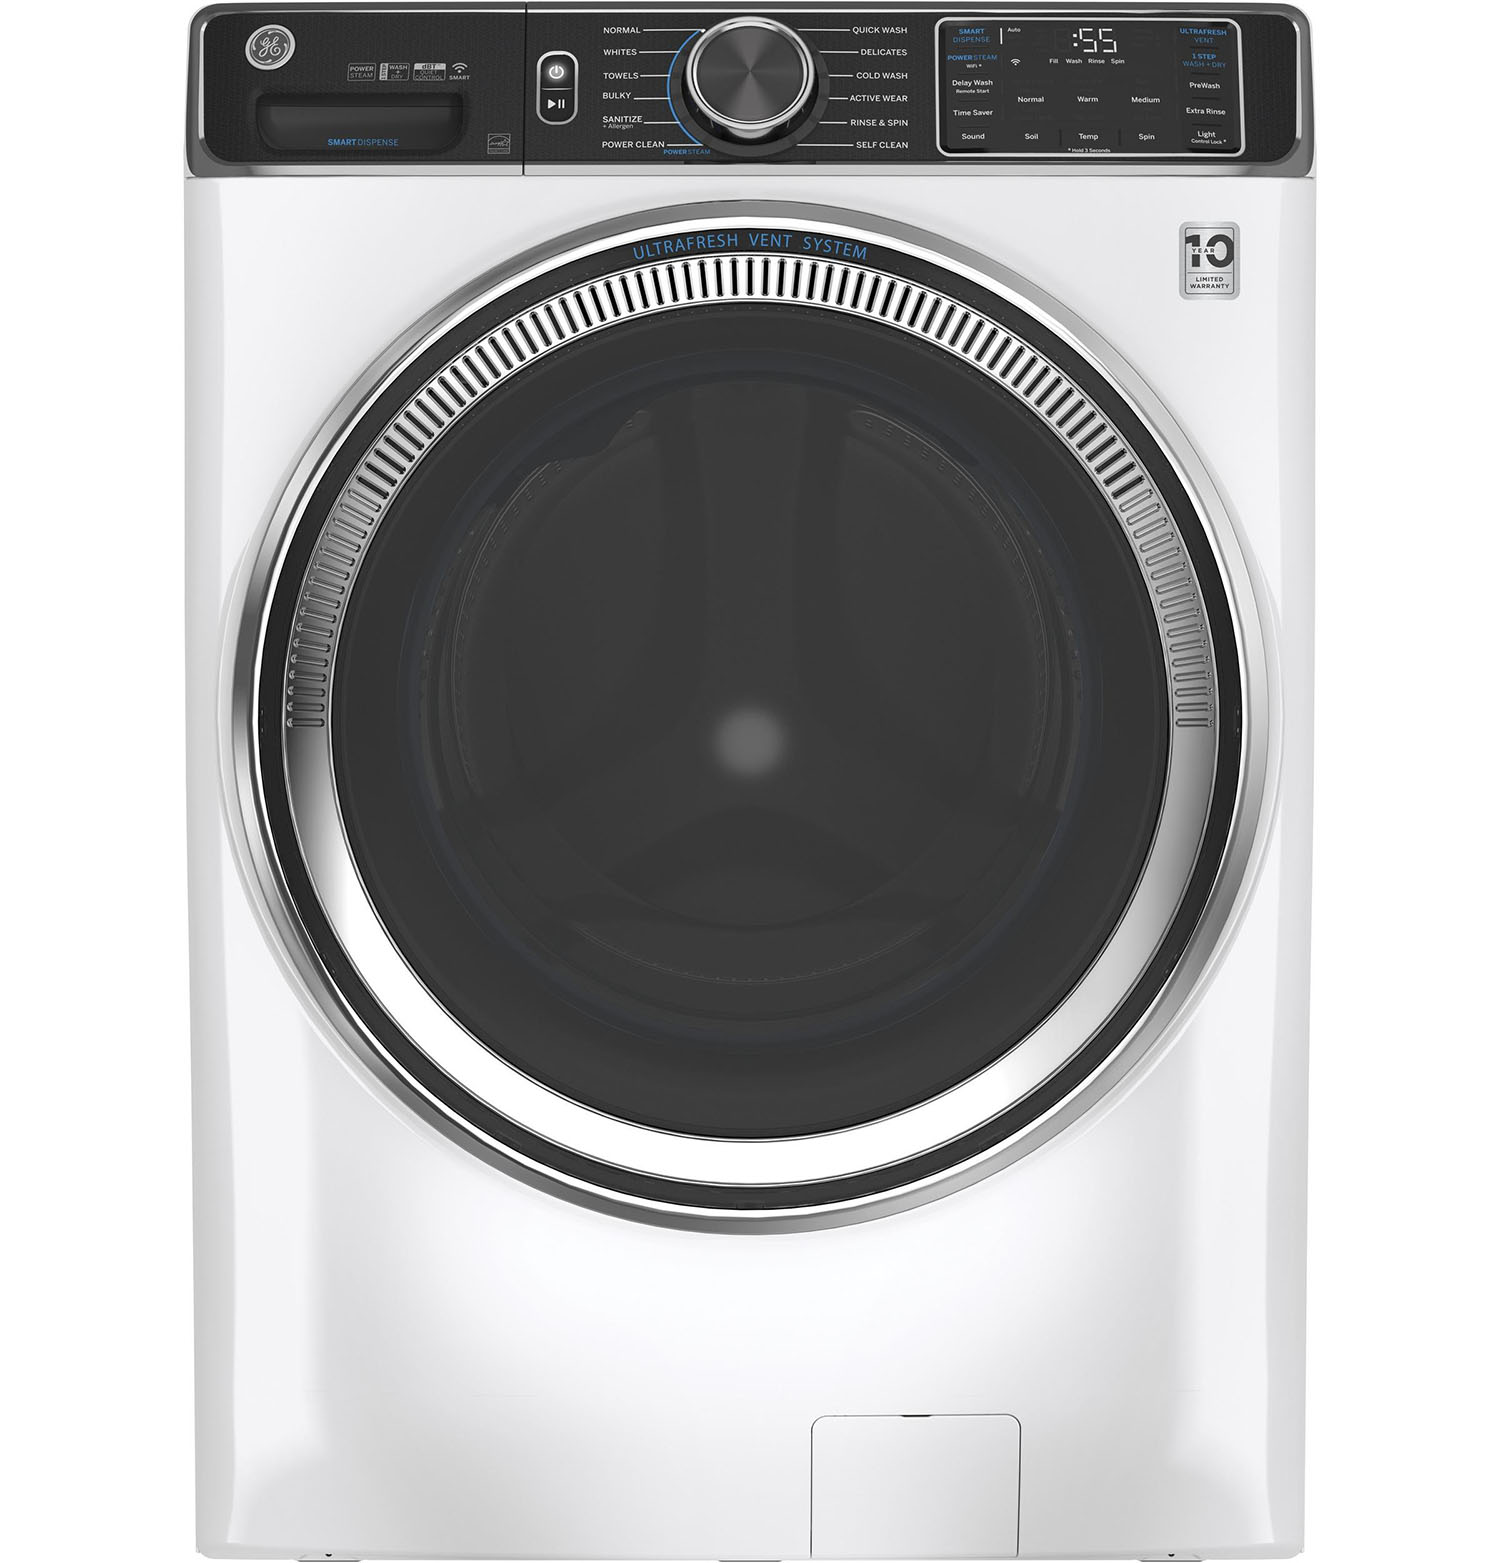 How To Fix The Error Code E96 For GE Washing Machine